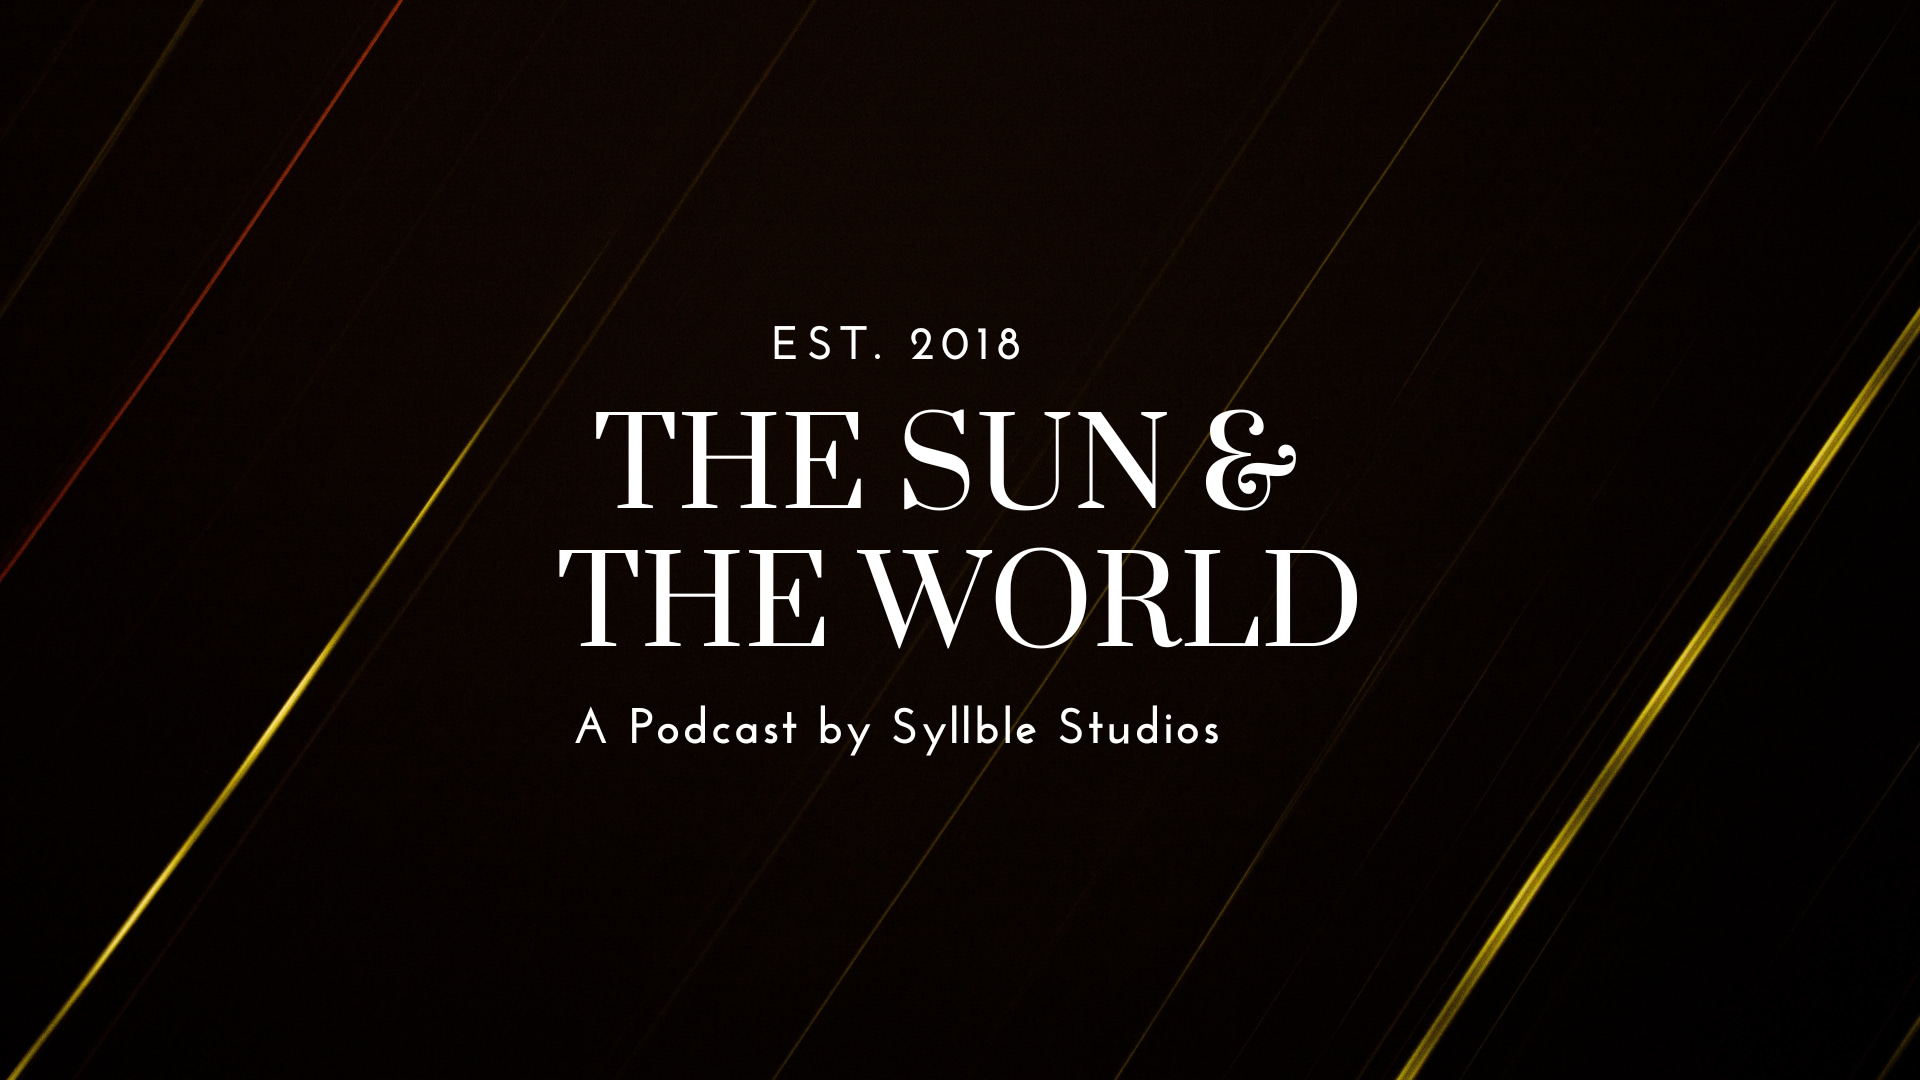 Syllble Transforms Its Author Series and Conversations with Creatives into “The Sun & The World” Podcast Series